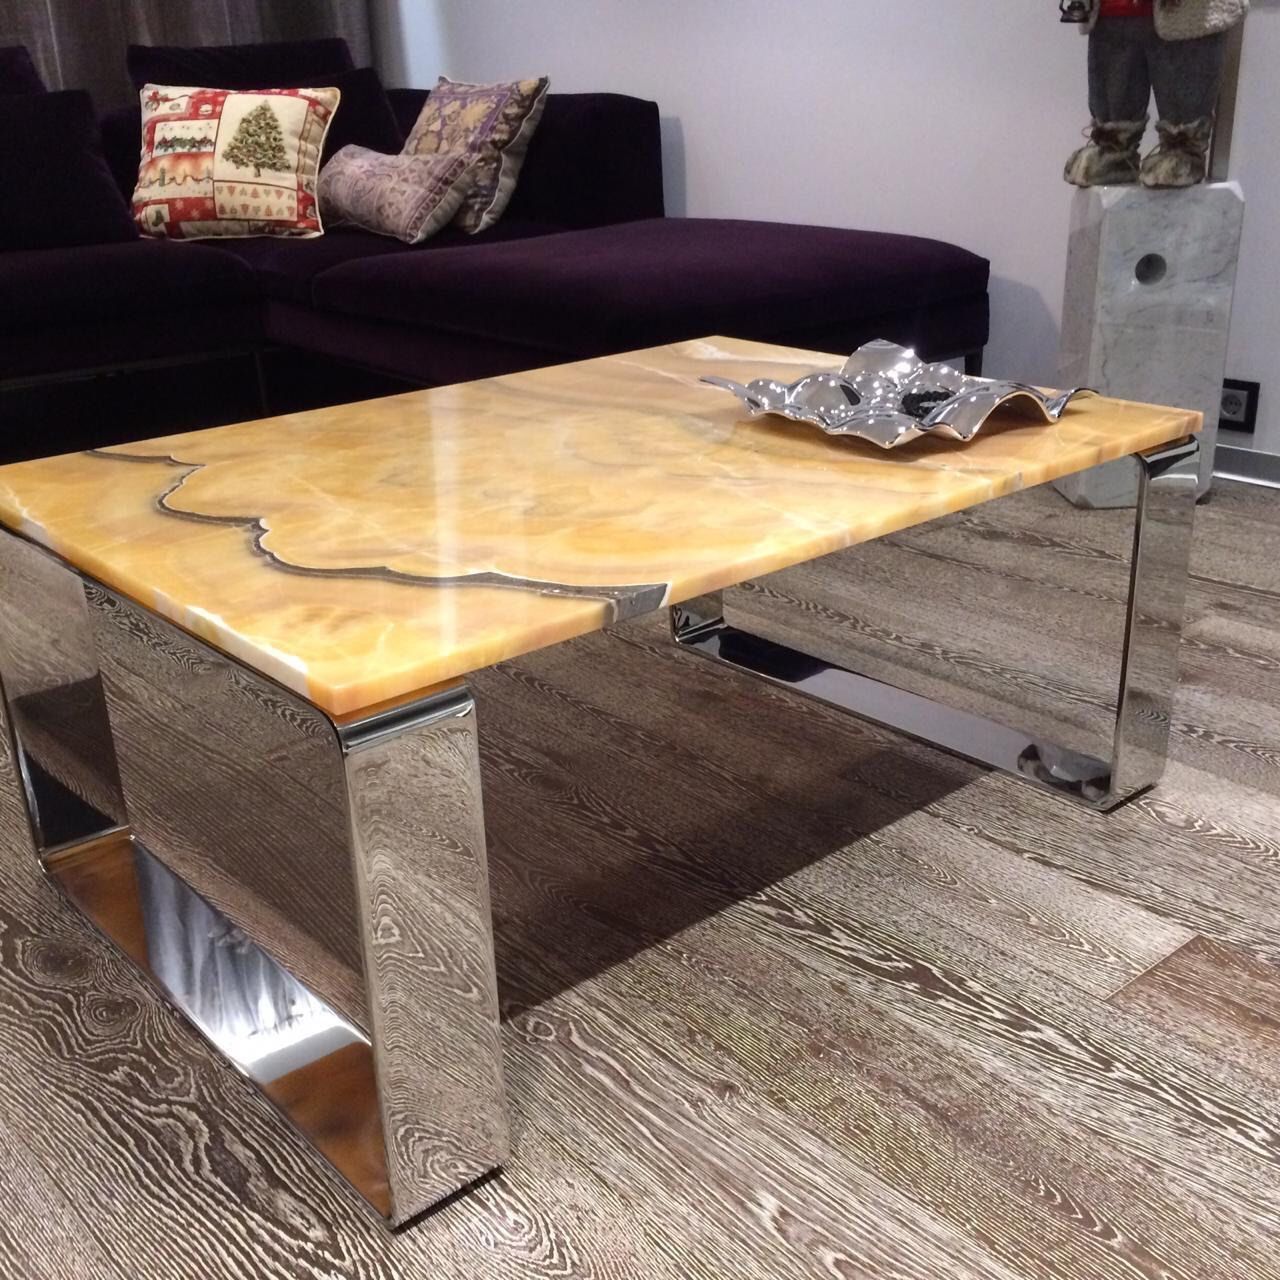 How To Choose The Perfect Coffee Table Legs – Coffee Table Decor With Coffee Tables With Metal Legs (Gallery 19 of 20)